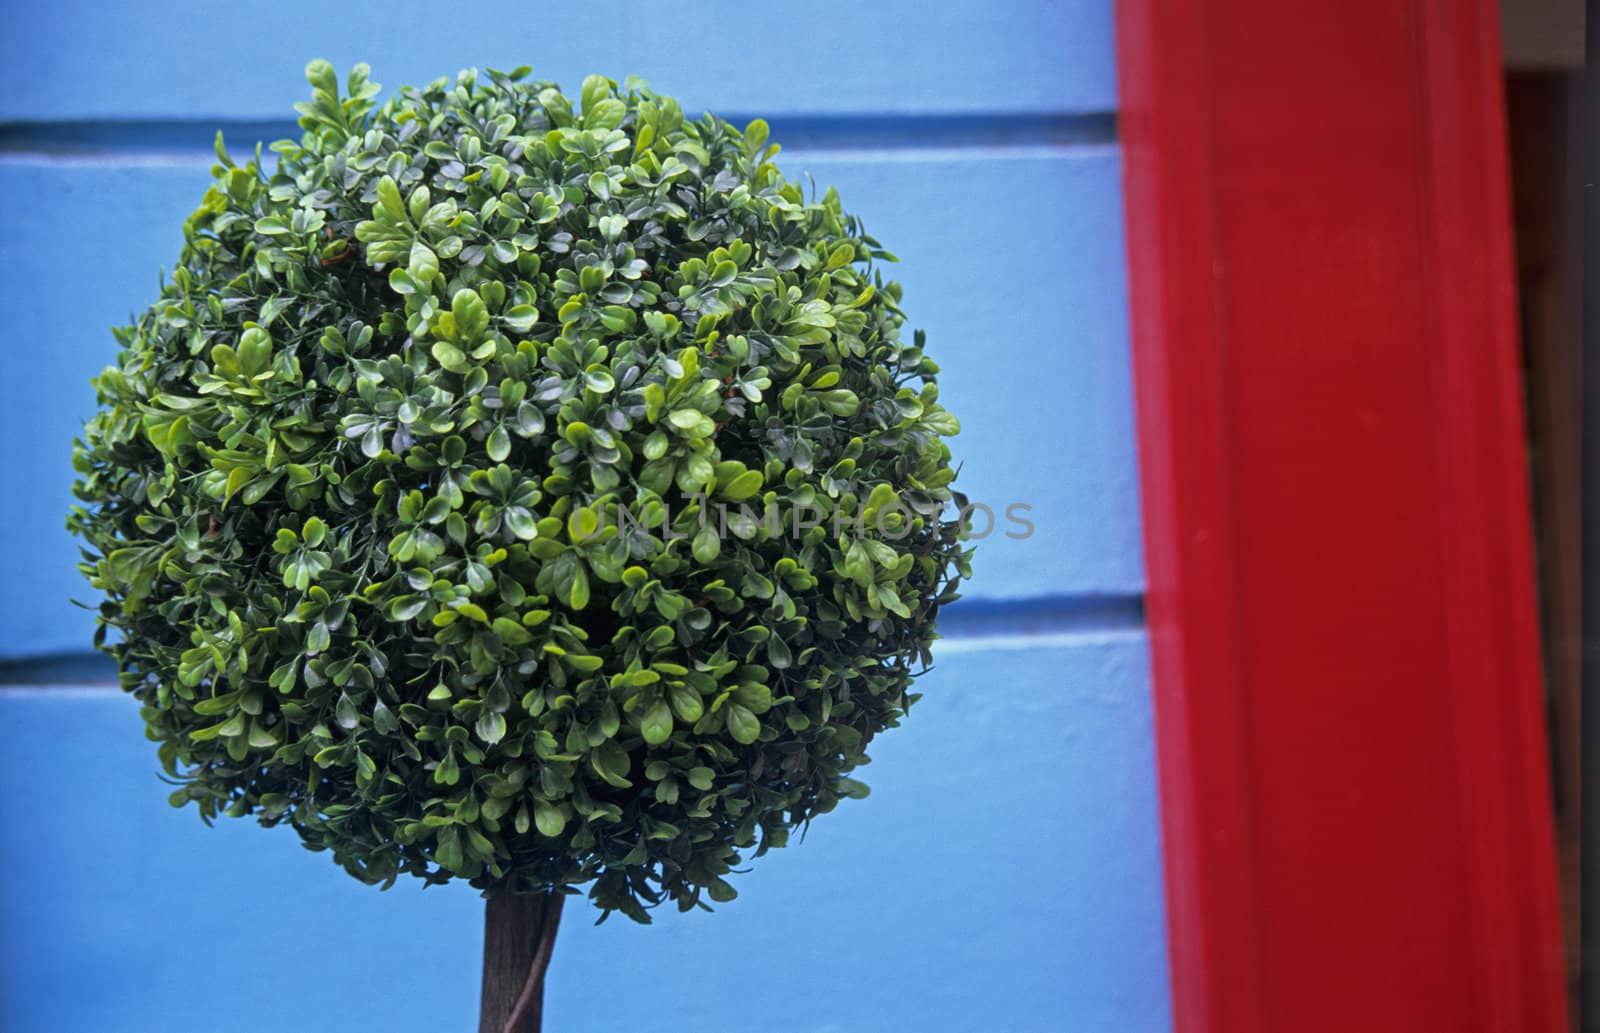 A topiary on a blue and red background